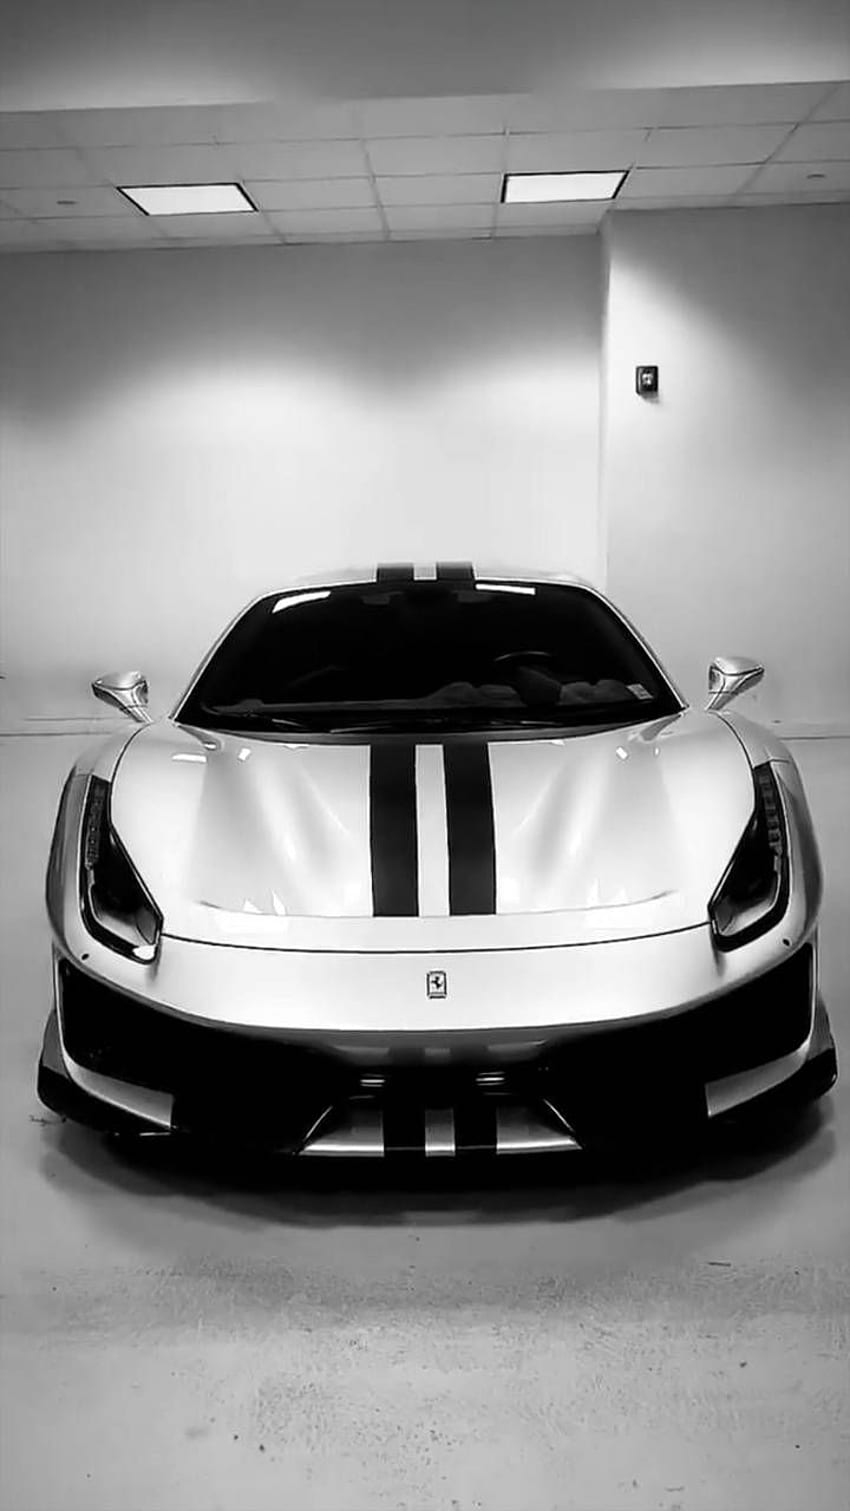 488 Pista by AbdxllahM - f1 now. Browse millions of popular. Super cars, Sports cars luxury, Cool sports cars, Ferrari Pista HD phone wallpaper